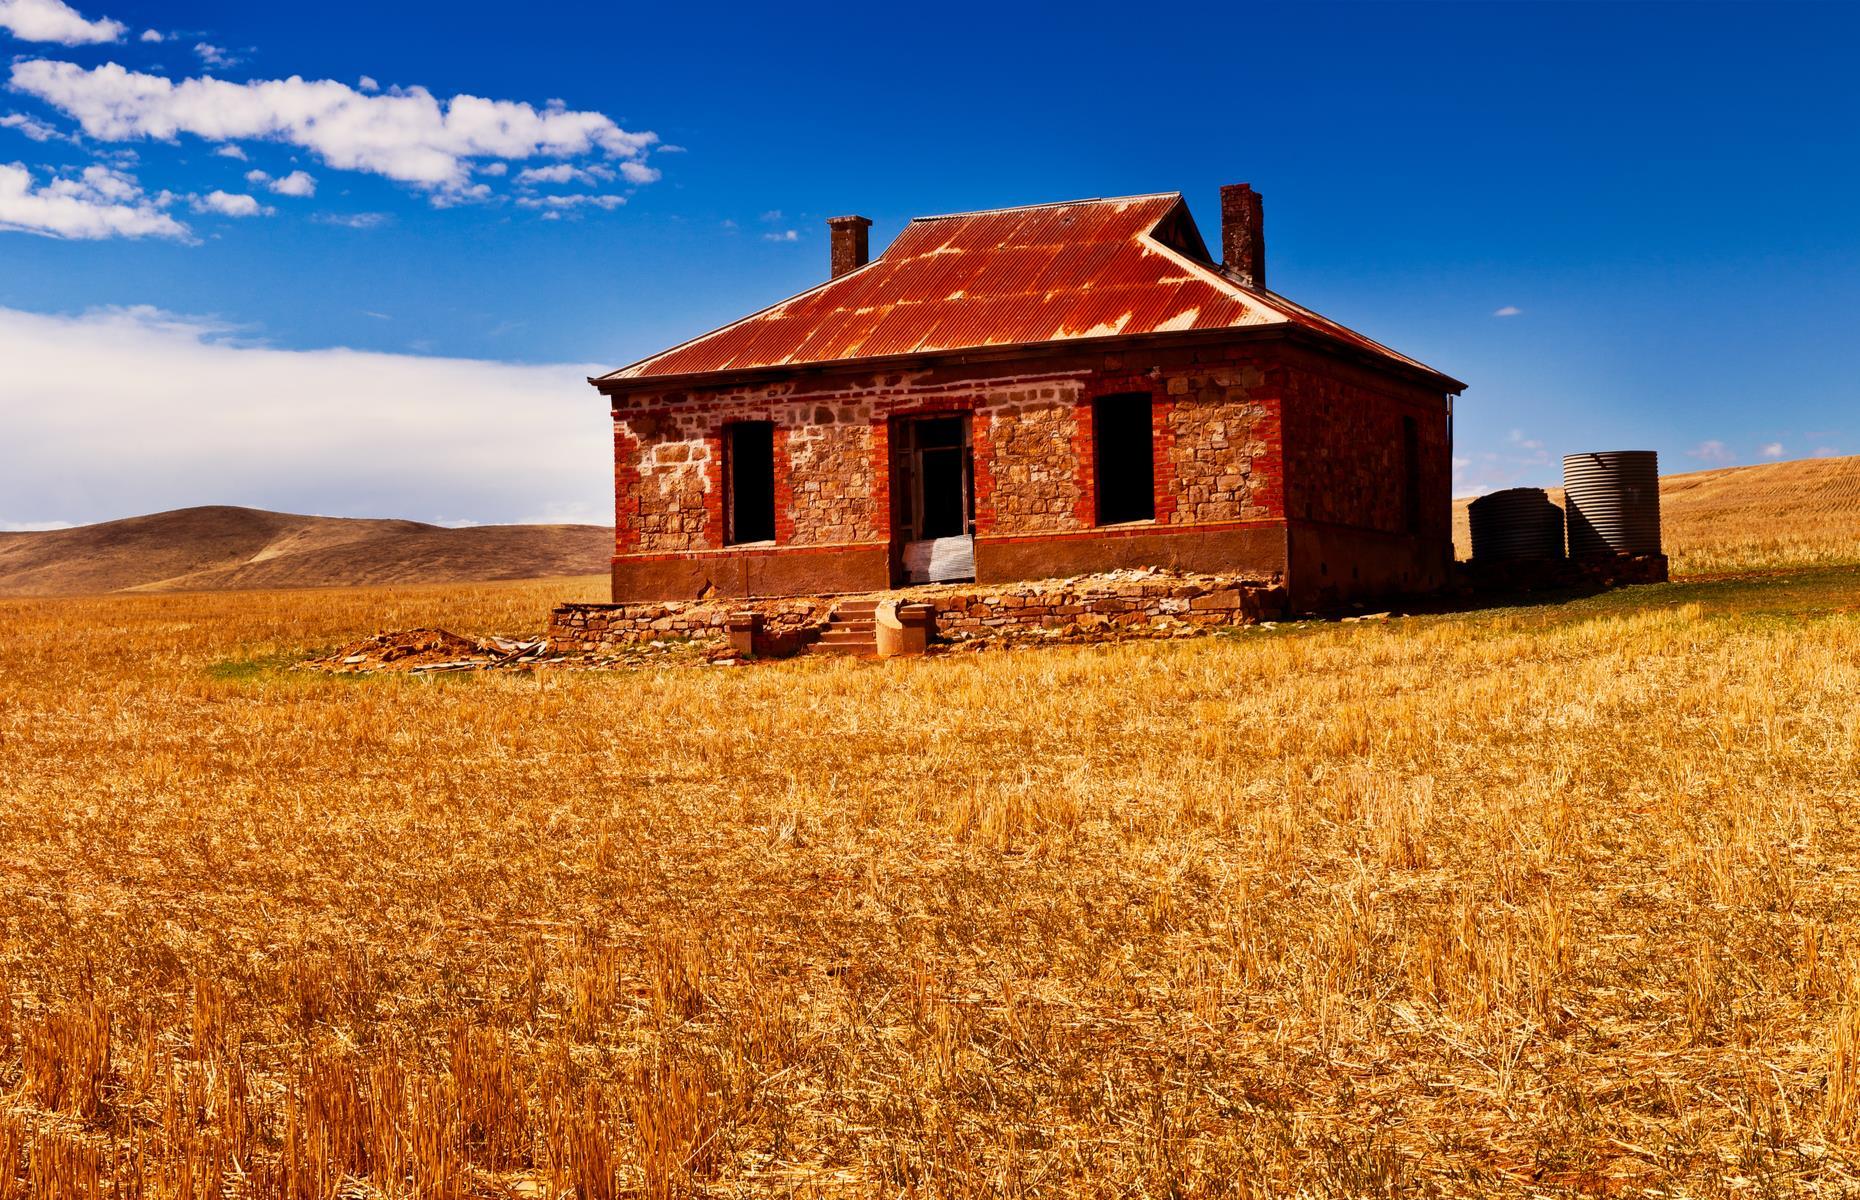 <p>This abandoned homestead in the foothills of the Mount Lofty ranges might not look significant but fans of Australian rock band Midnight Oil will be well familiar with its image. Captured by lauded landscape photographer Ken Duncan, a picture of this humble tumbledown homestead graced the cover of the band's 1987 album <em>Diesel and Dust</em>. Today it remains in its solitary state, a symbol of both the stark Australian outback and a group of rock legends.</p>